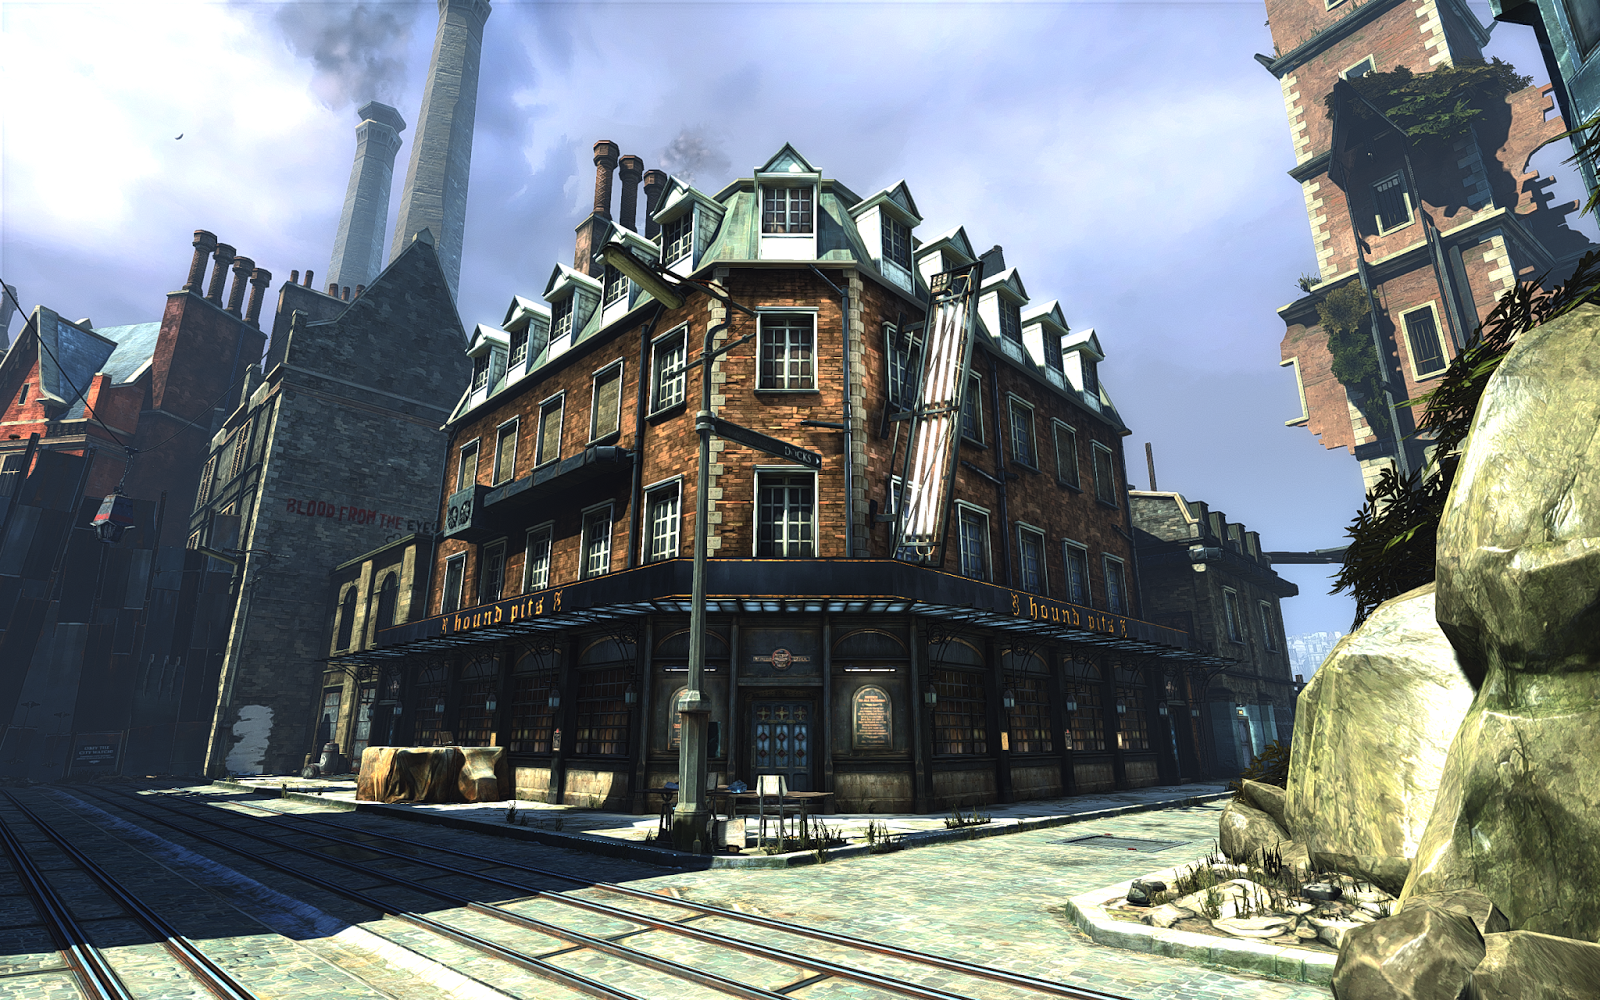 Screenshot from the game. Street corner depicting a red brick building with tall industrial chimneys behind it.